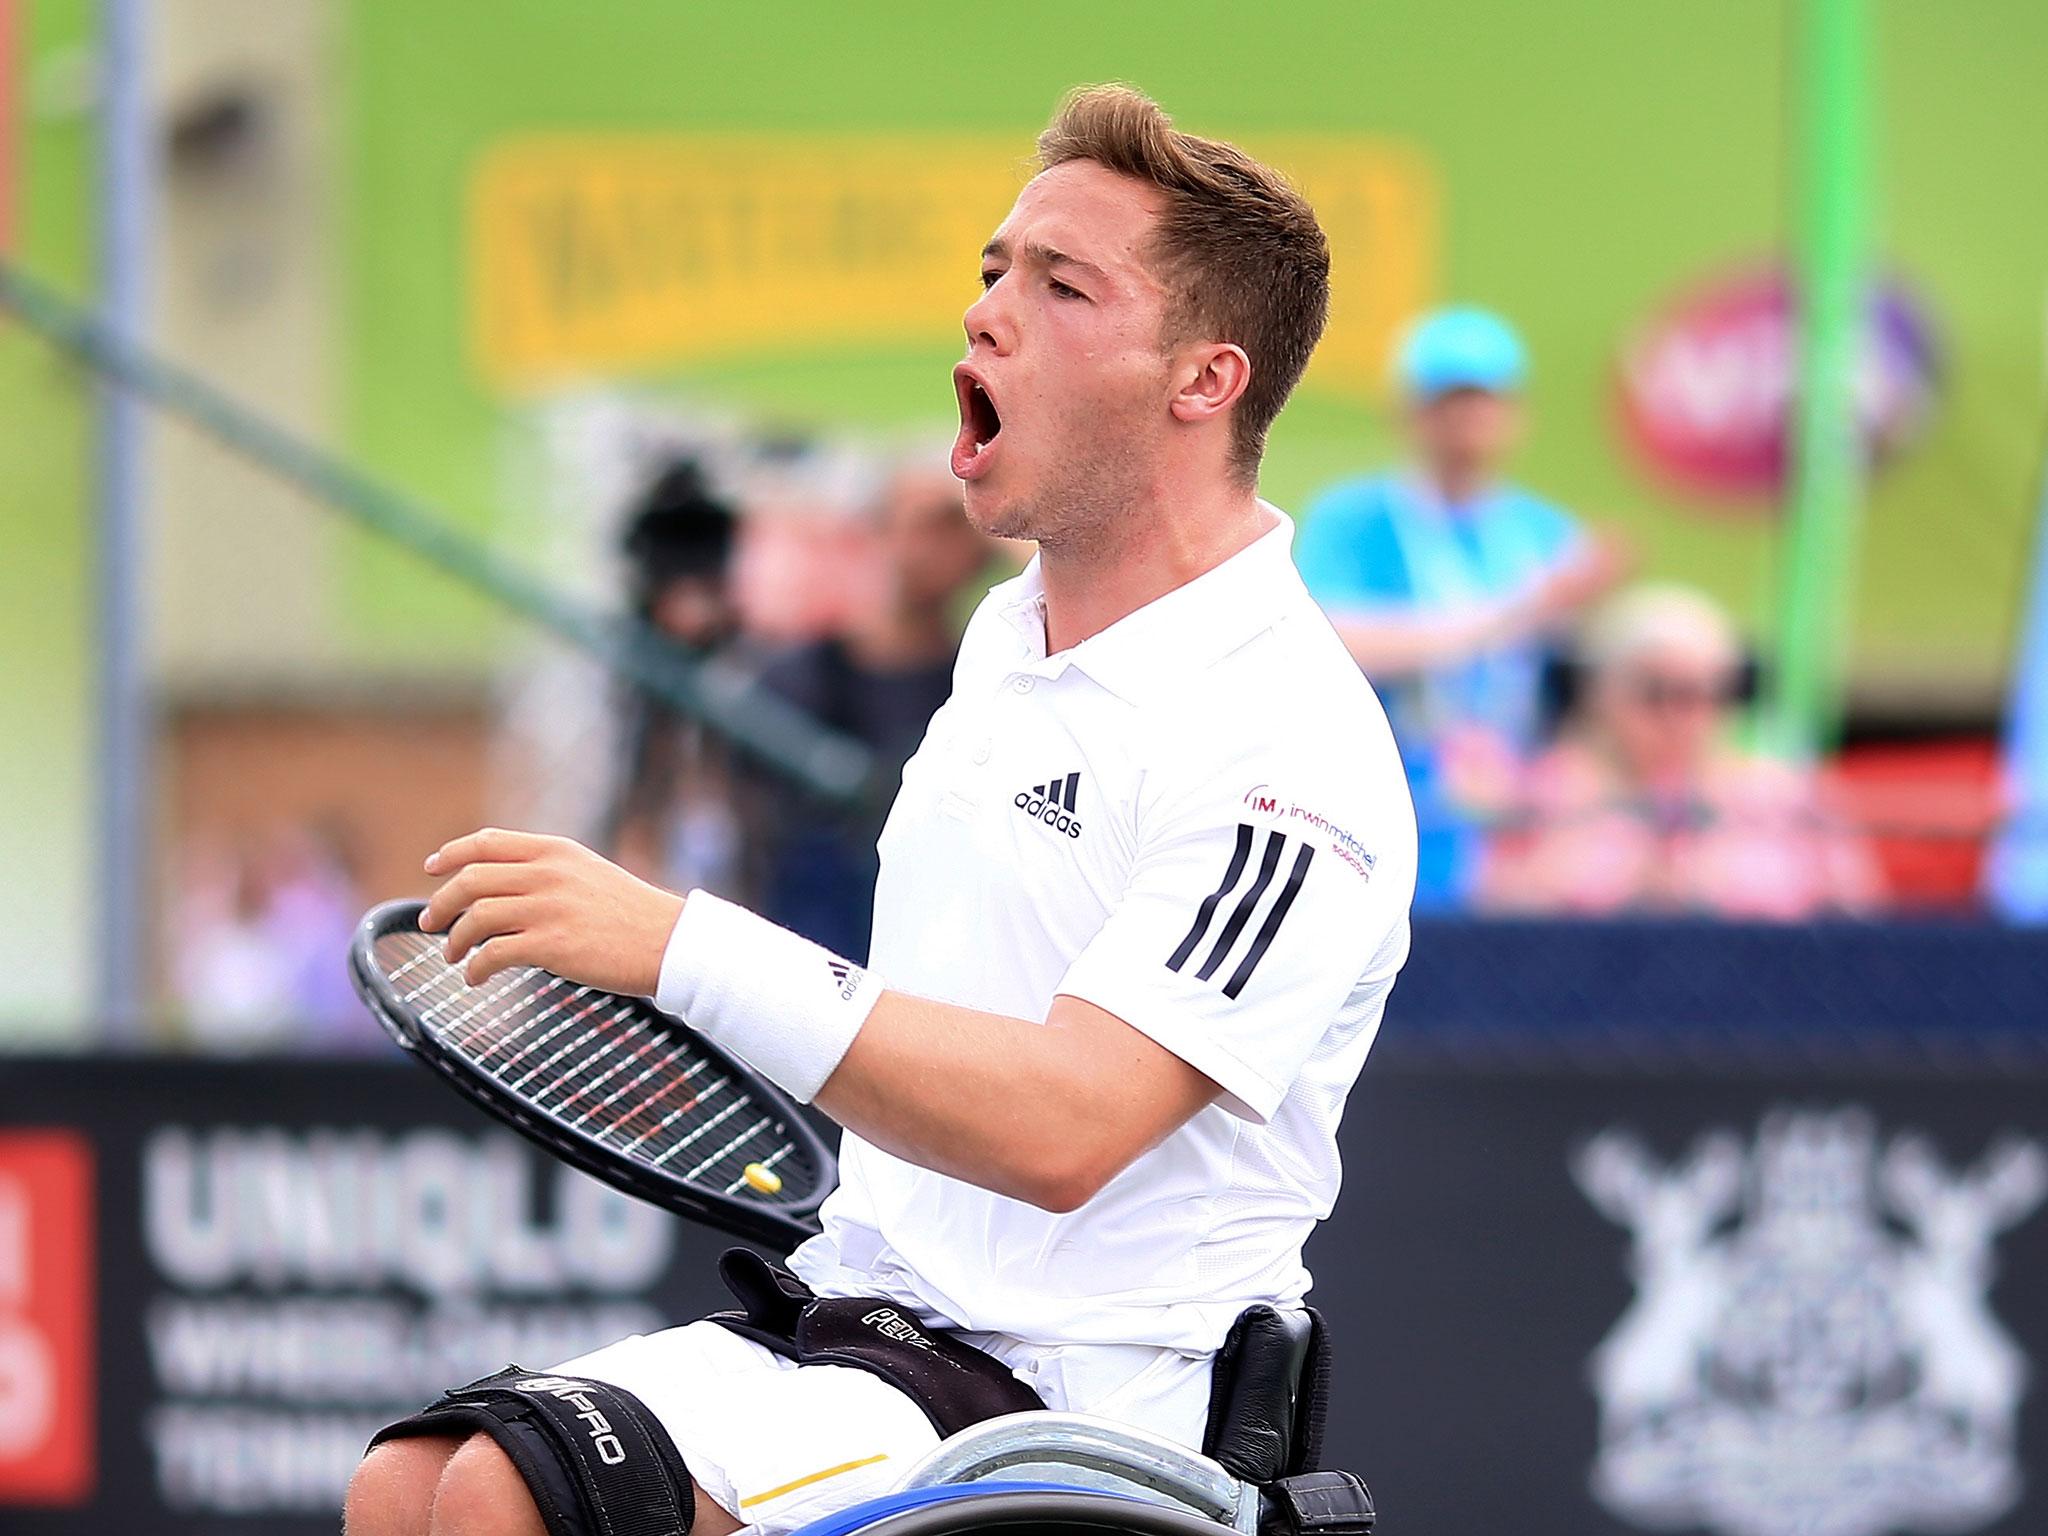 Alfie Hewett doubles up with US Open wheelchair success in singles and